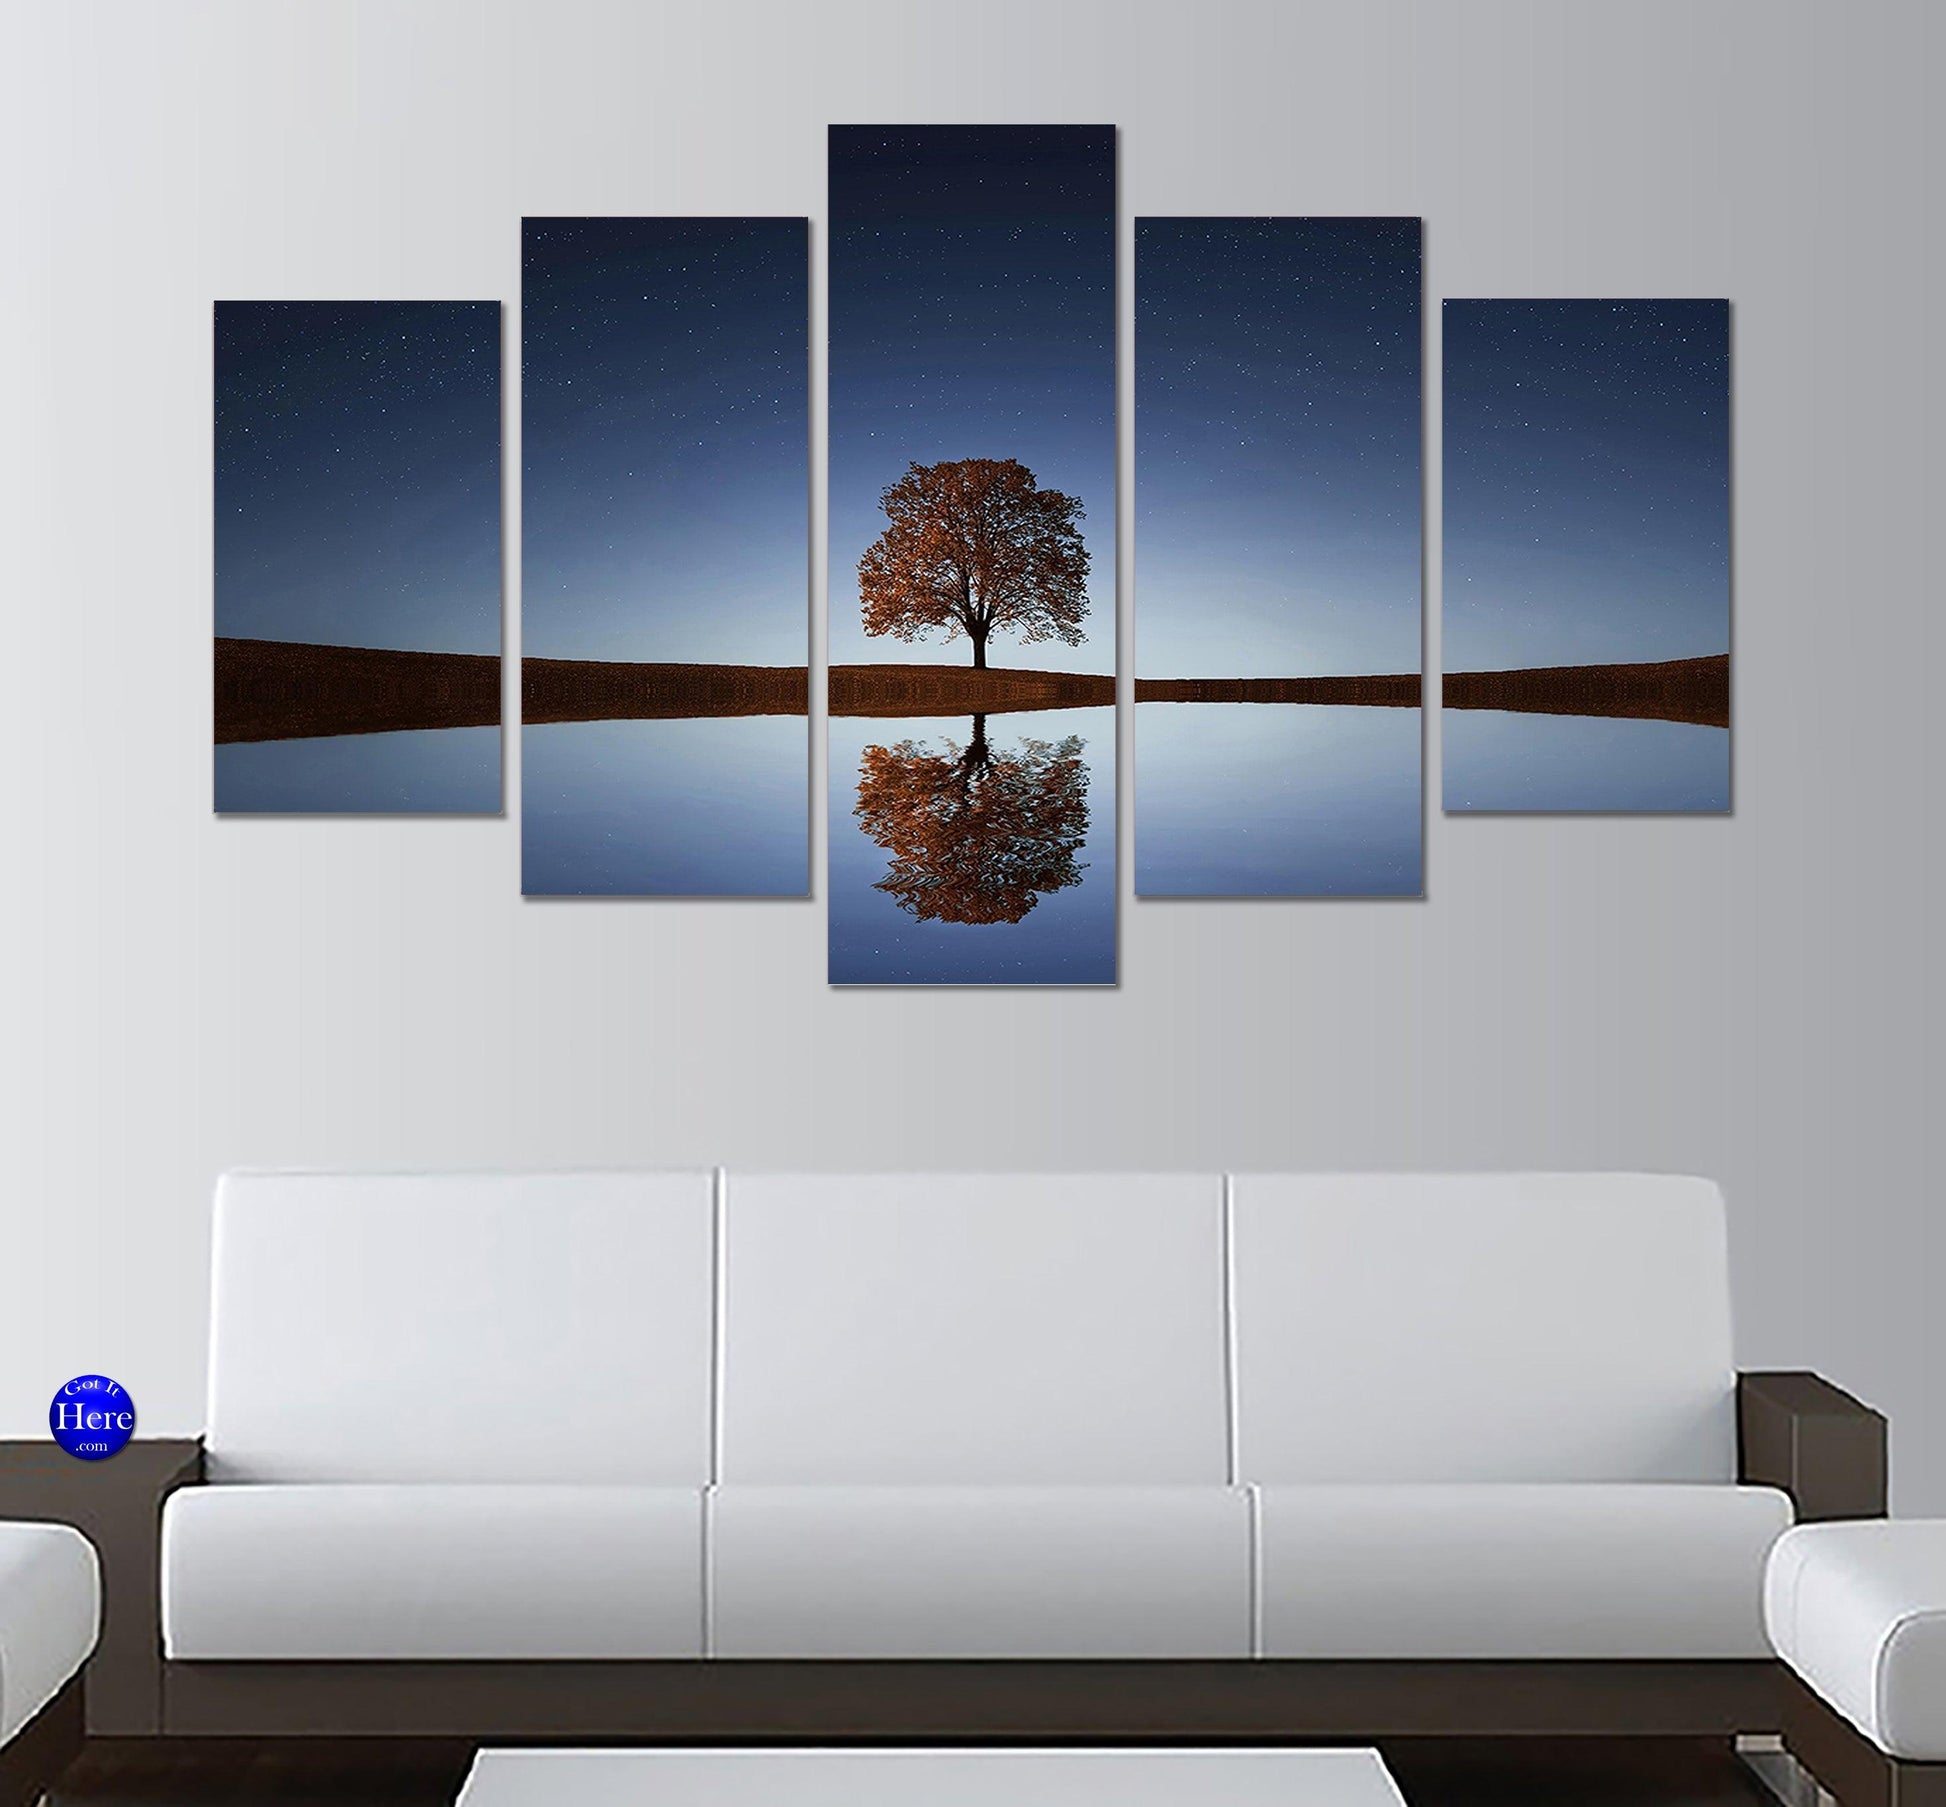 Tree At Twilight Reflected in Desert Oasis Lake 5 Panel Canvas Print Wall Art - GotItHere.com